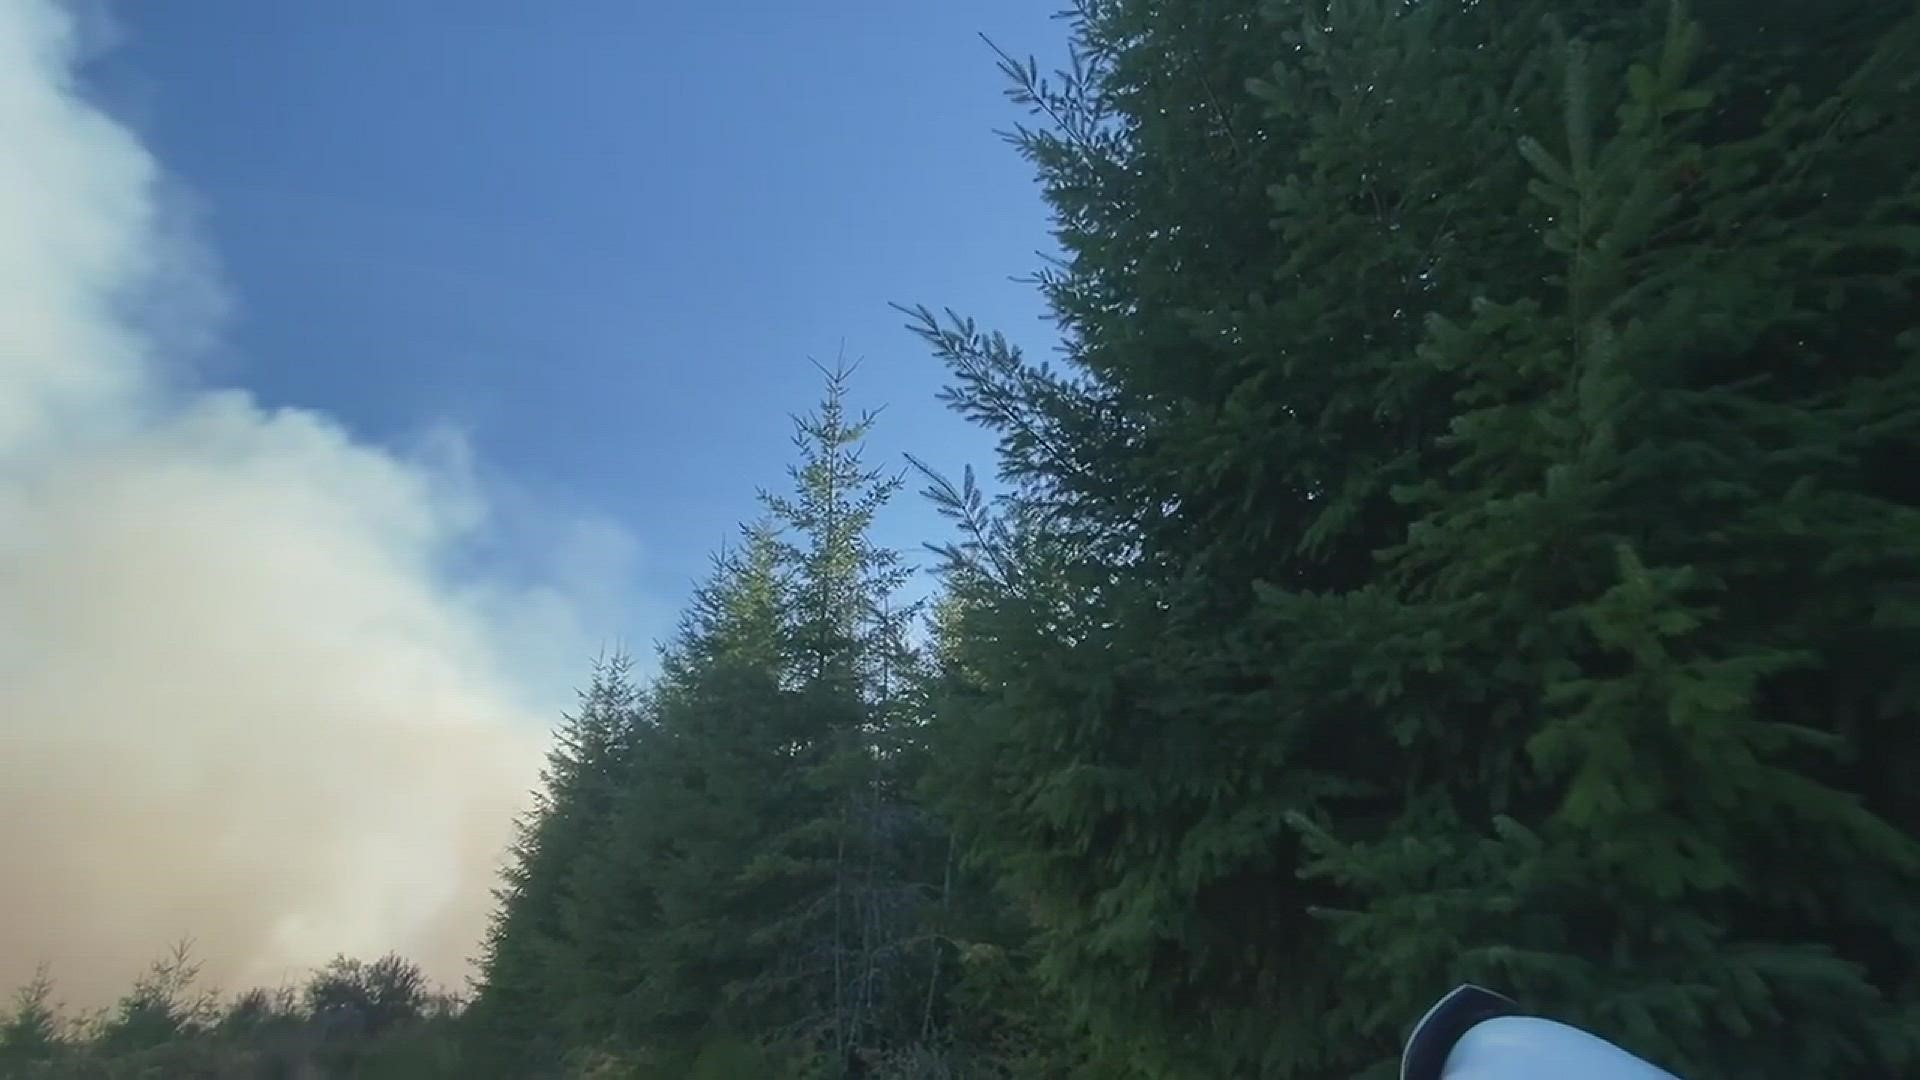 A fire has burned at least 30 acres in a forested area northwest of Scappoose on Saturday, fire officials said.